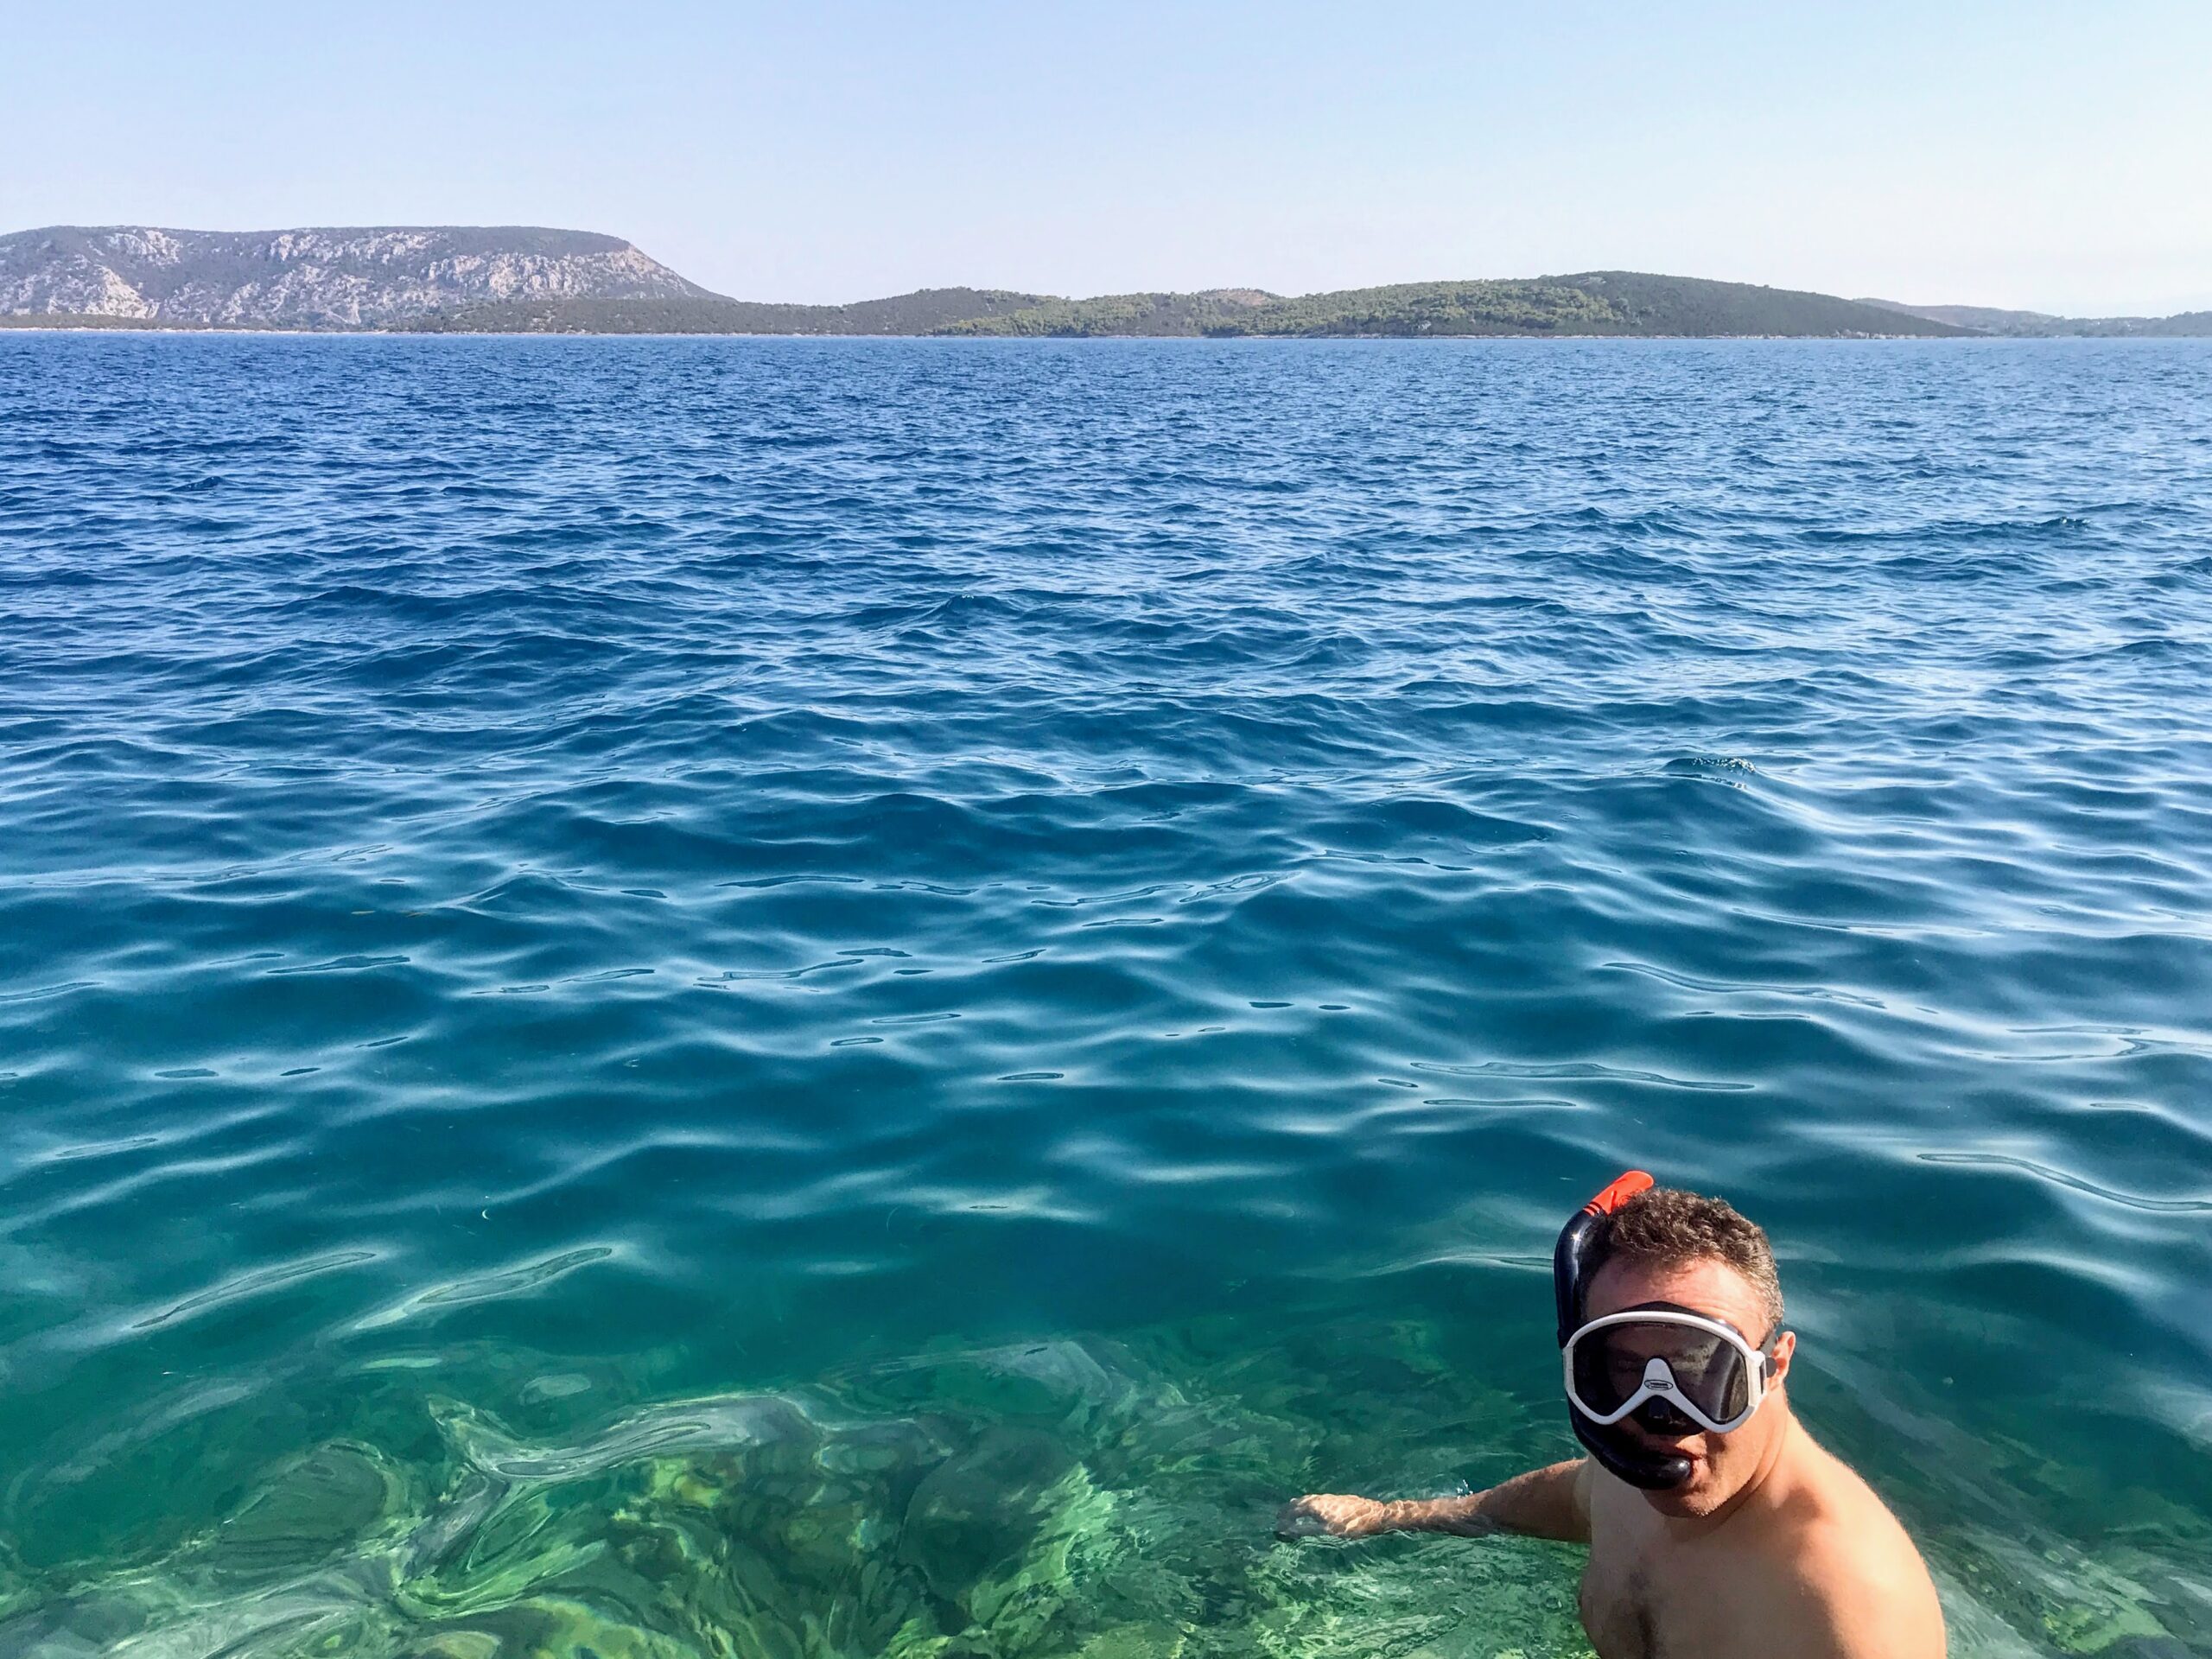 Andy snorkelling in the crystal clear sea on Mandrakia side of Ermioni in Greece. He's wearing a black and white snorkel mask and snorkel.